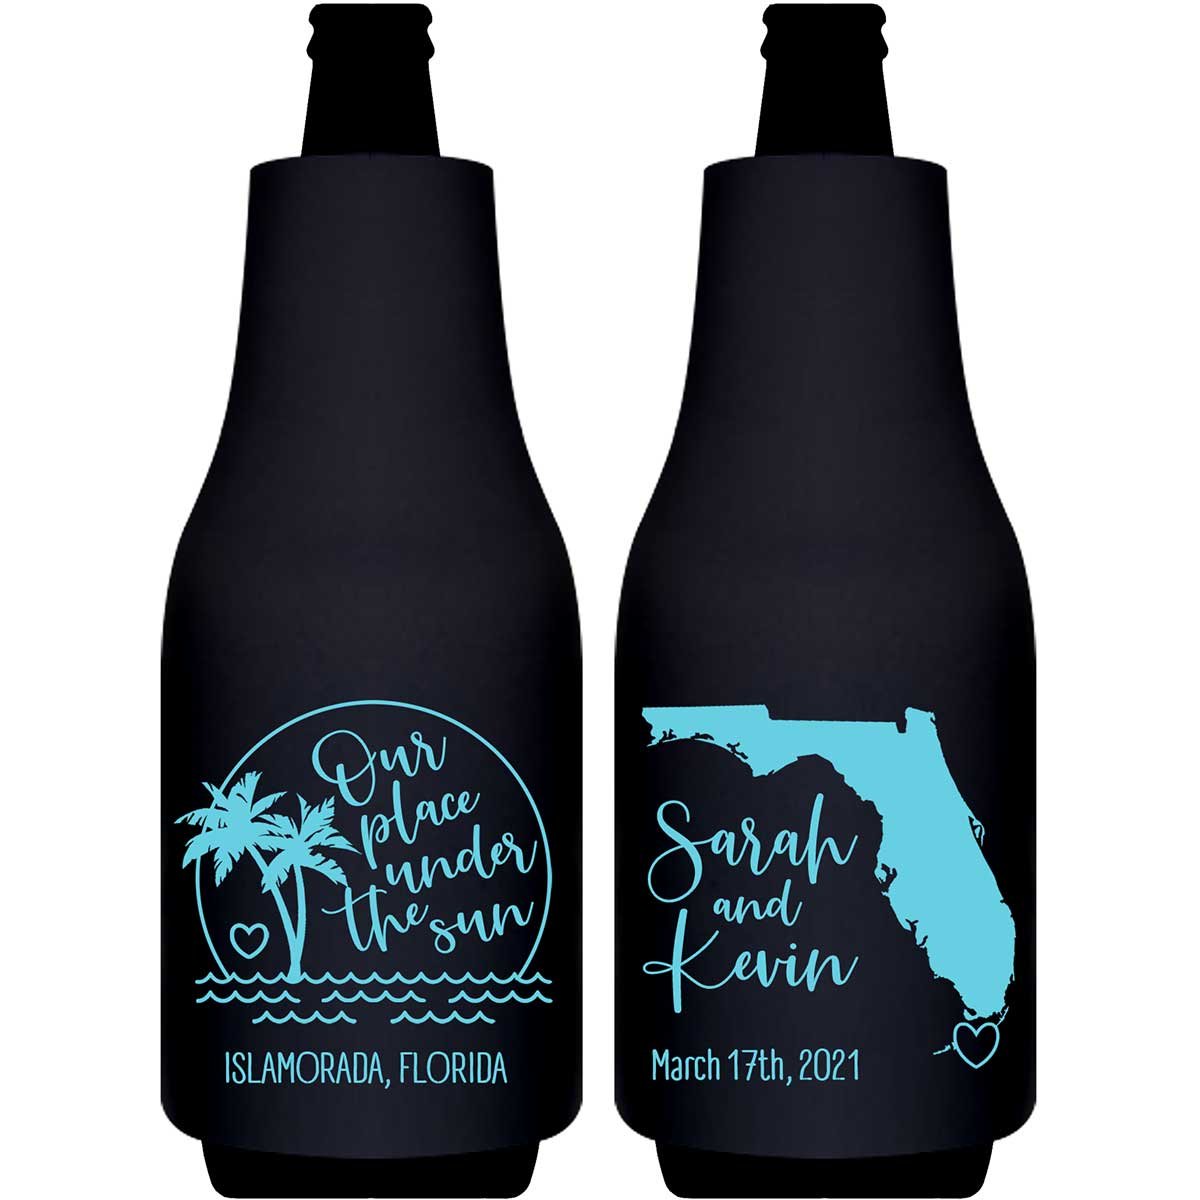 Our Place Under The Sun 1A Foldable Bottle Sleeve Koozies Wedding Gifts for Guests